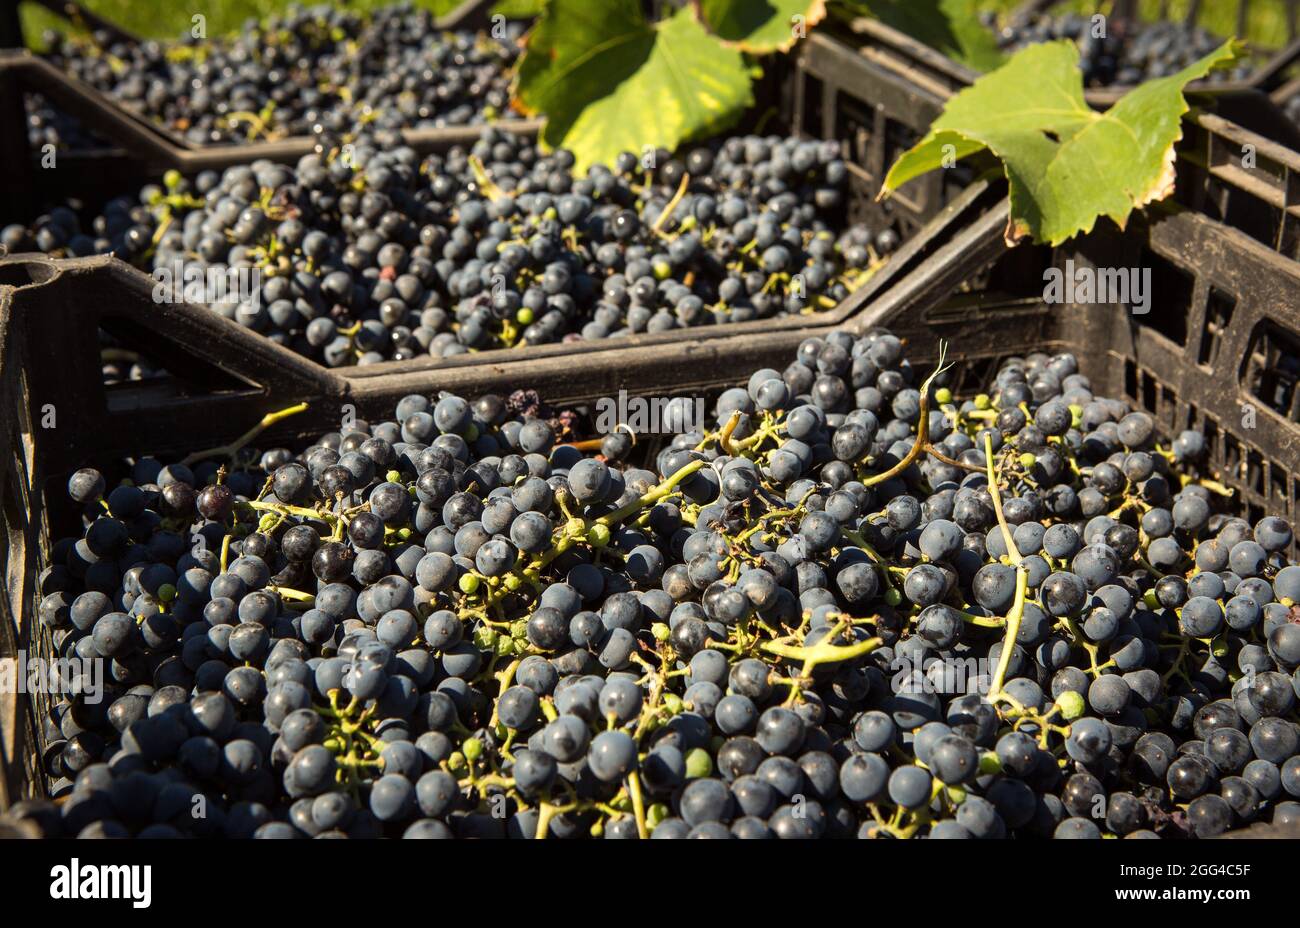 Grape harvest. Wine grapes are collected in boxes. Autumn is the time of grape harvest and wine making. Stock Photo